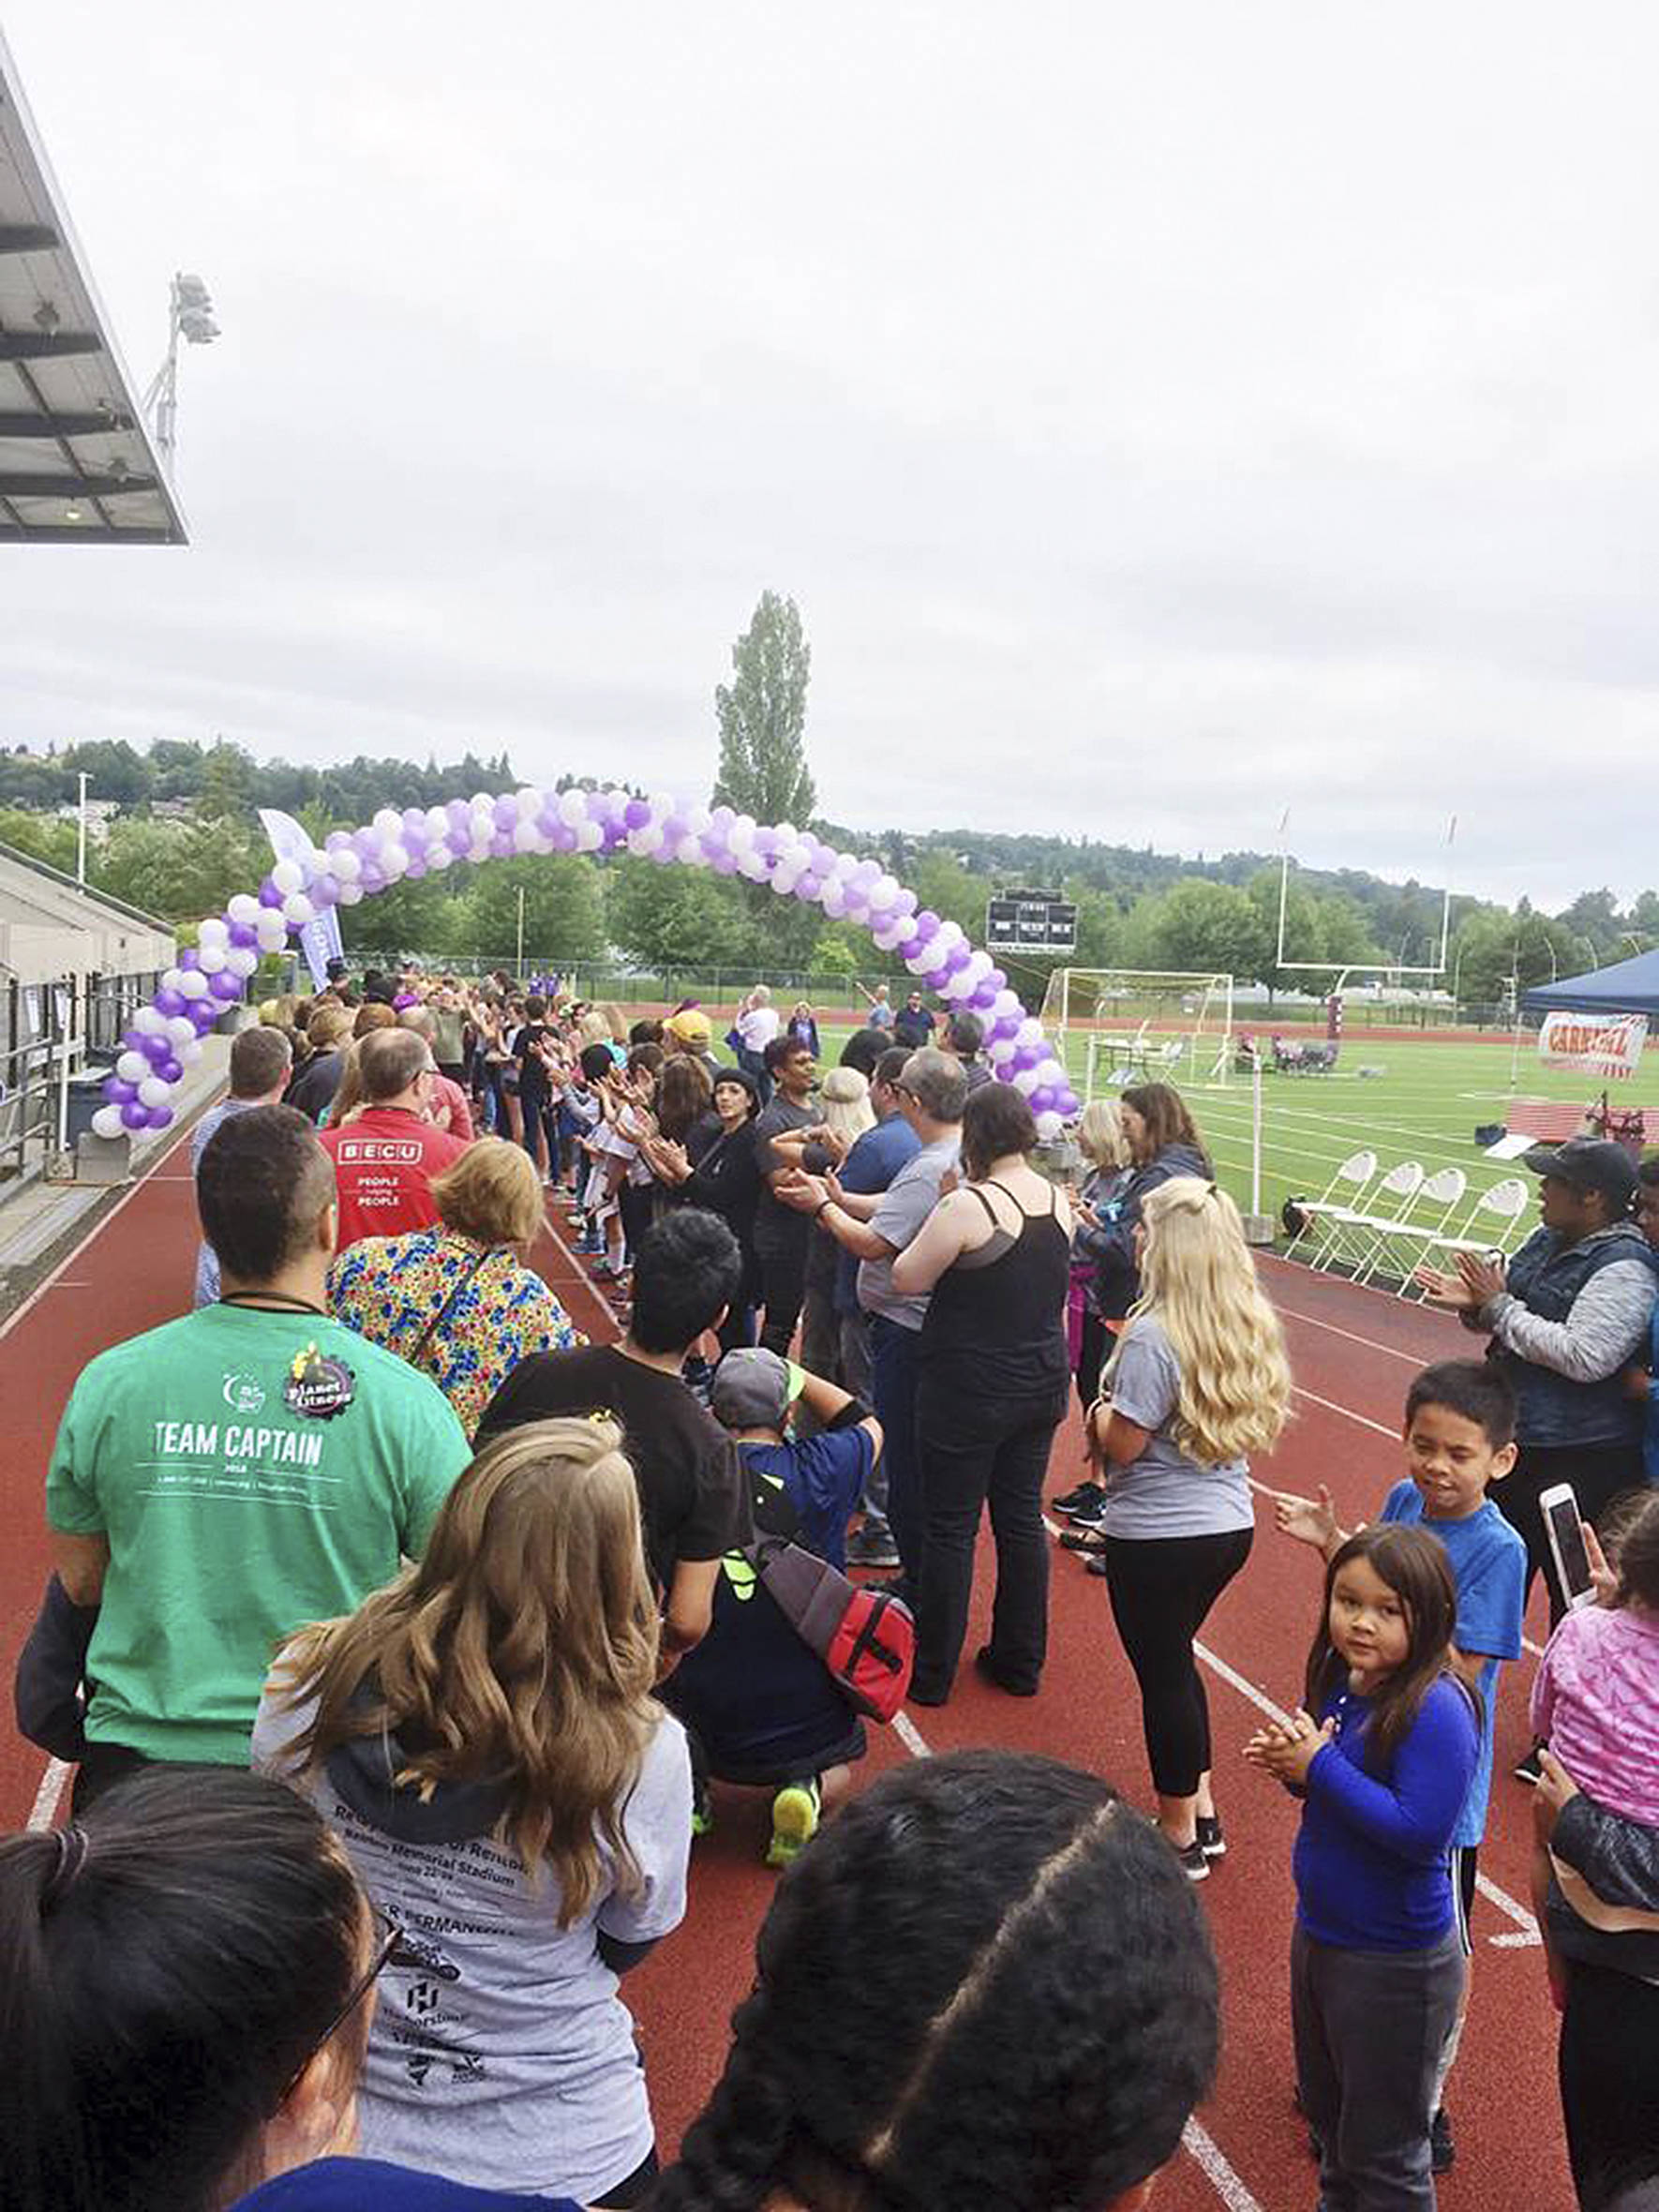 The Relay for Life of Renton last weekend raised $42,793.27 to help fight cancer in the community. More than 250 participants on 32 teams made up of local businesses, organization and school groups participated in the event. Submitted photo from The Relay for Life of Renton.